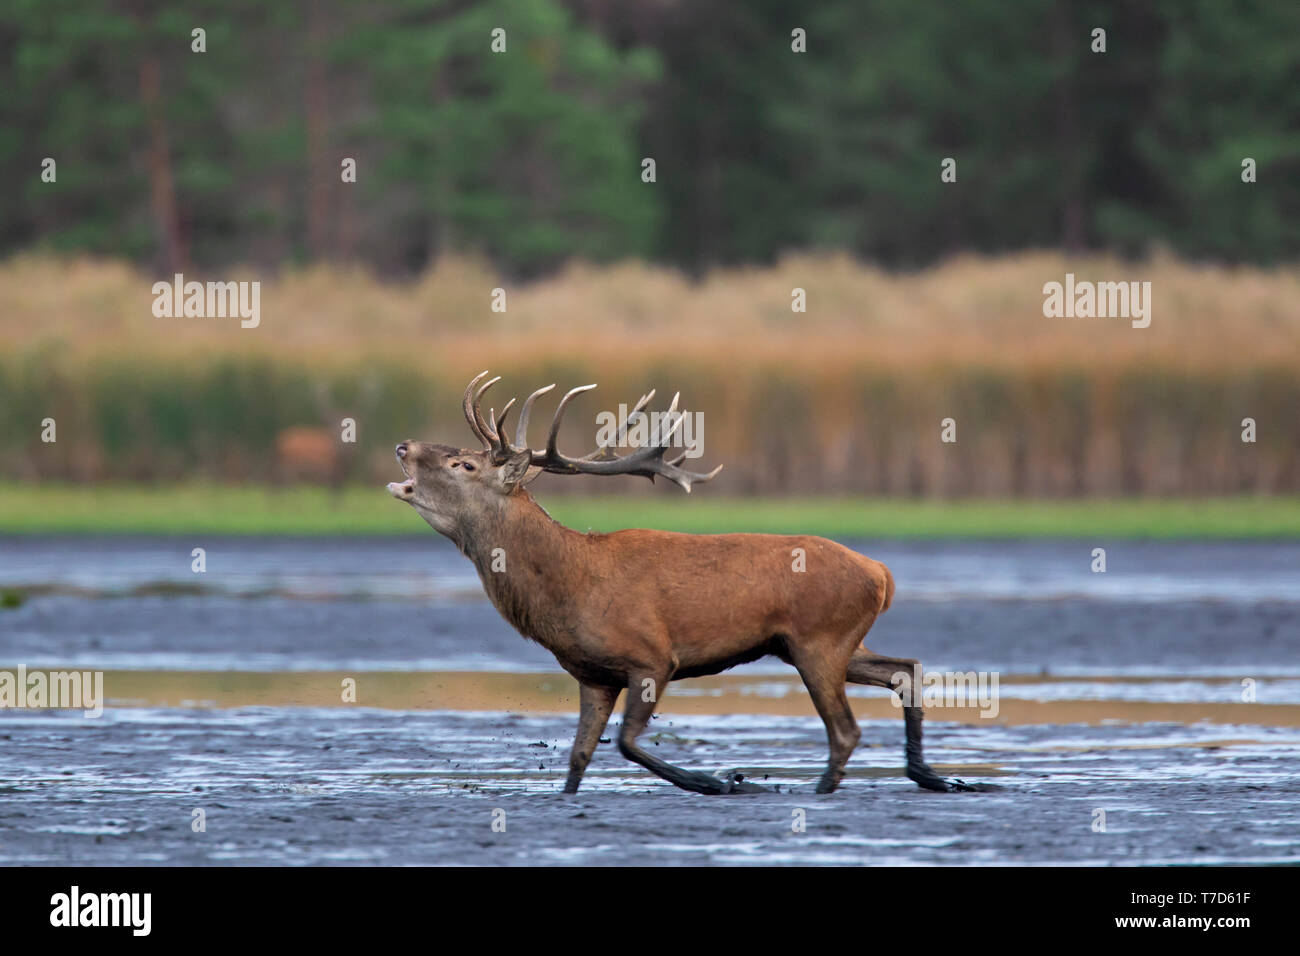 Solitary red deer (Cervus elaphus) stag running through the mud of lake / pond / river while bellowing / roaring during the rut in autumn / fall Stock Photo